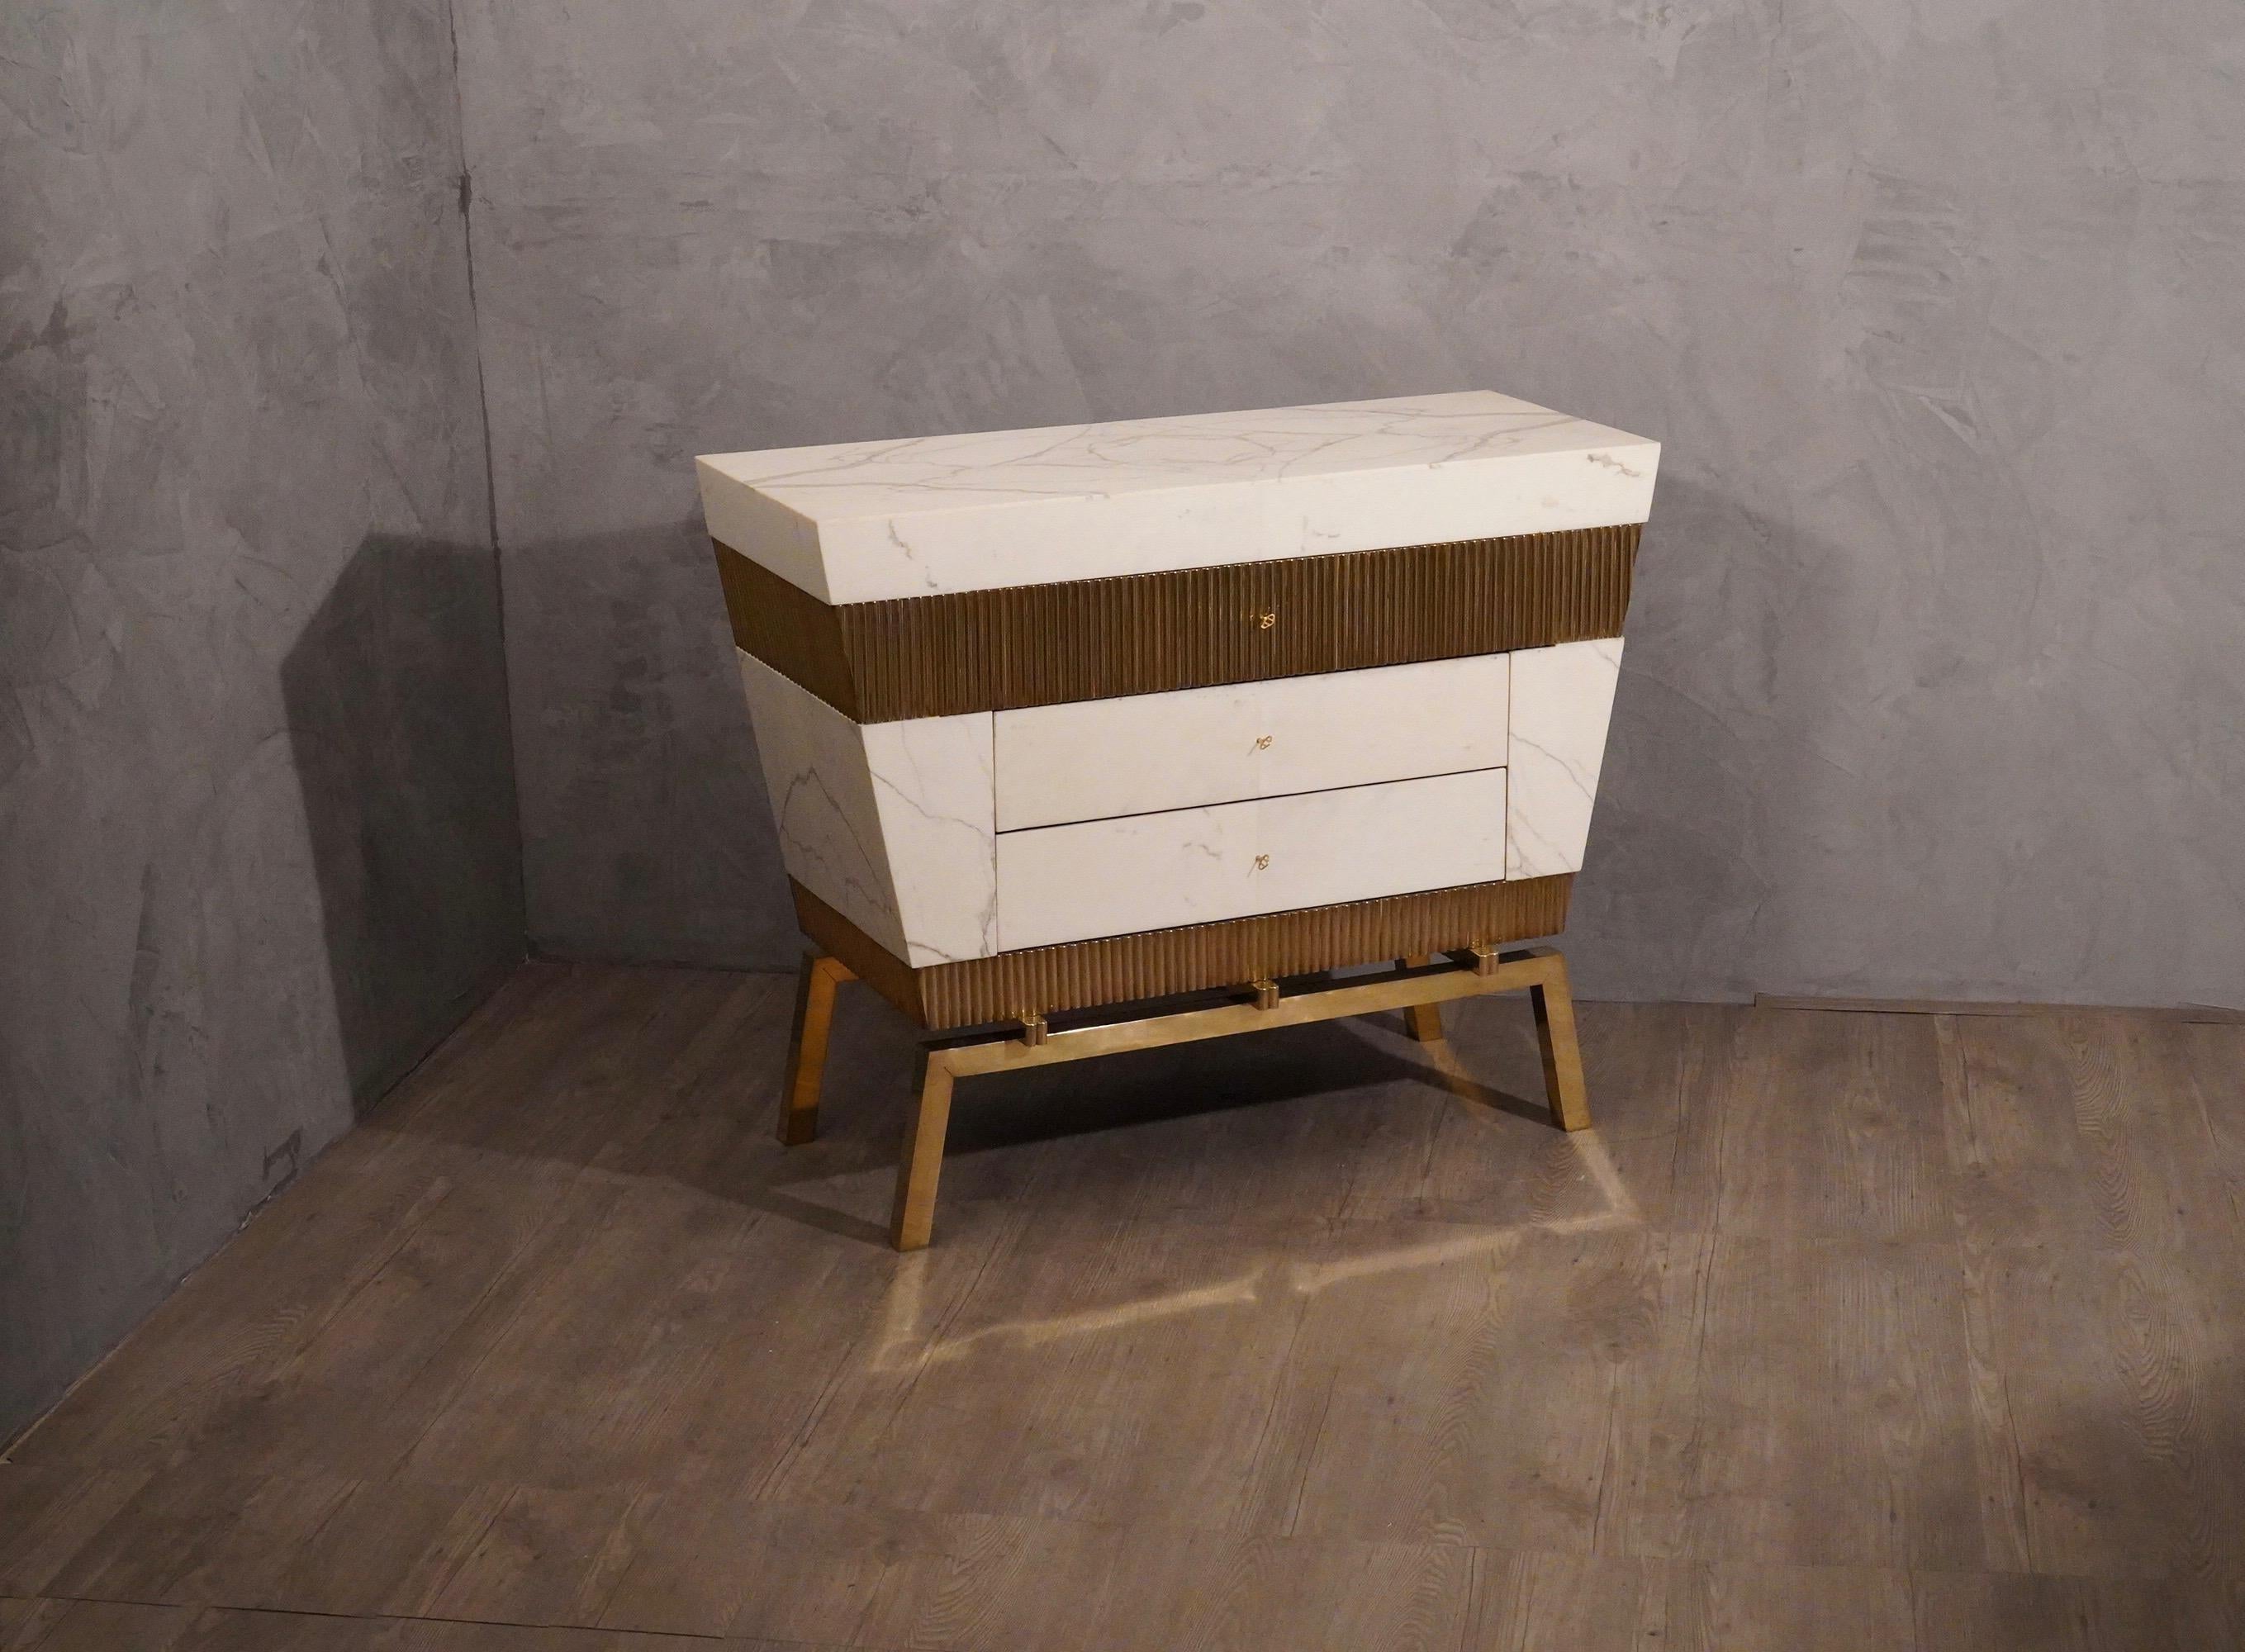 A magnificent commode created for the Hannauroma store. This Commode has a very luxurious appearance, due the use of not common materials, 